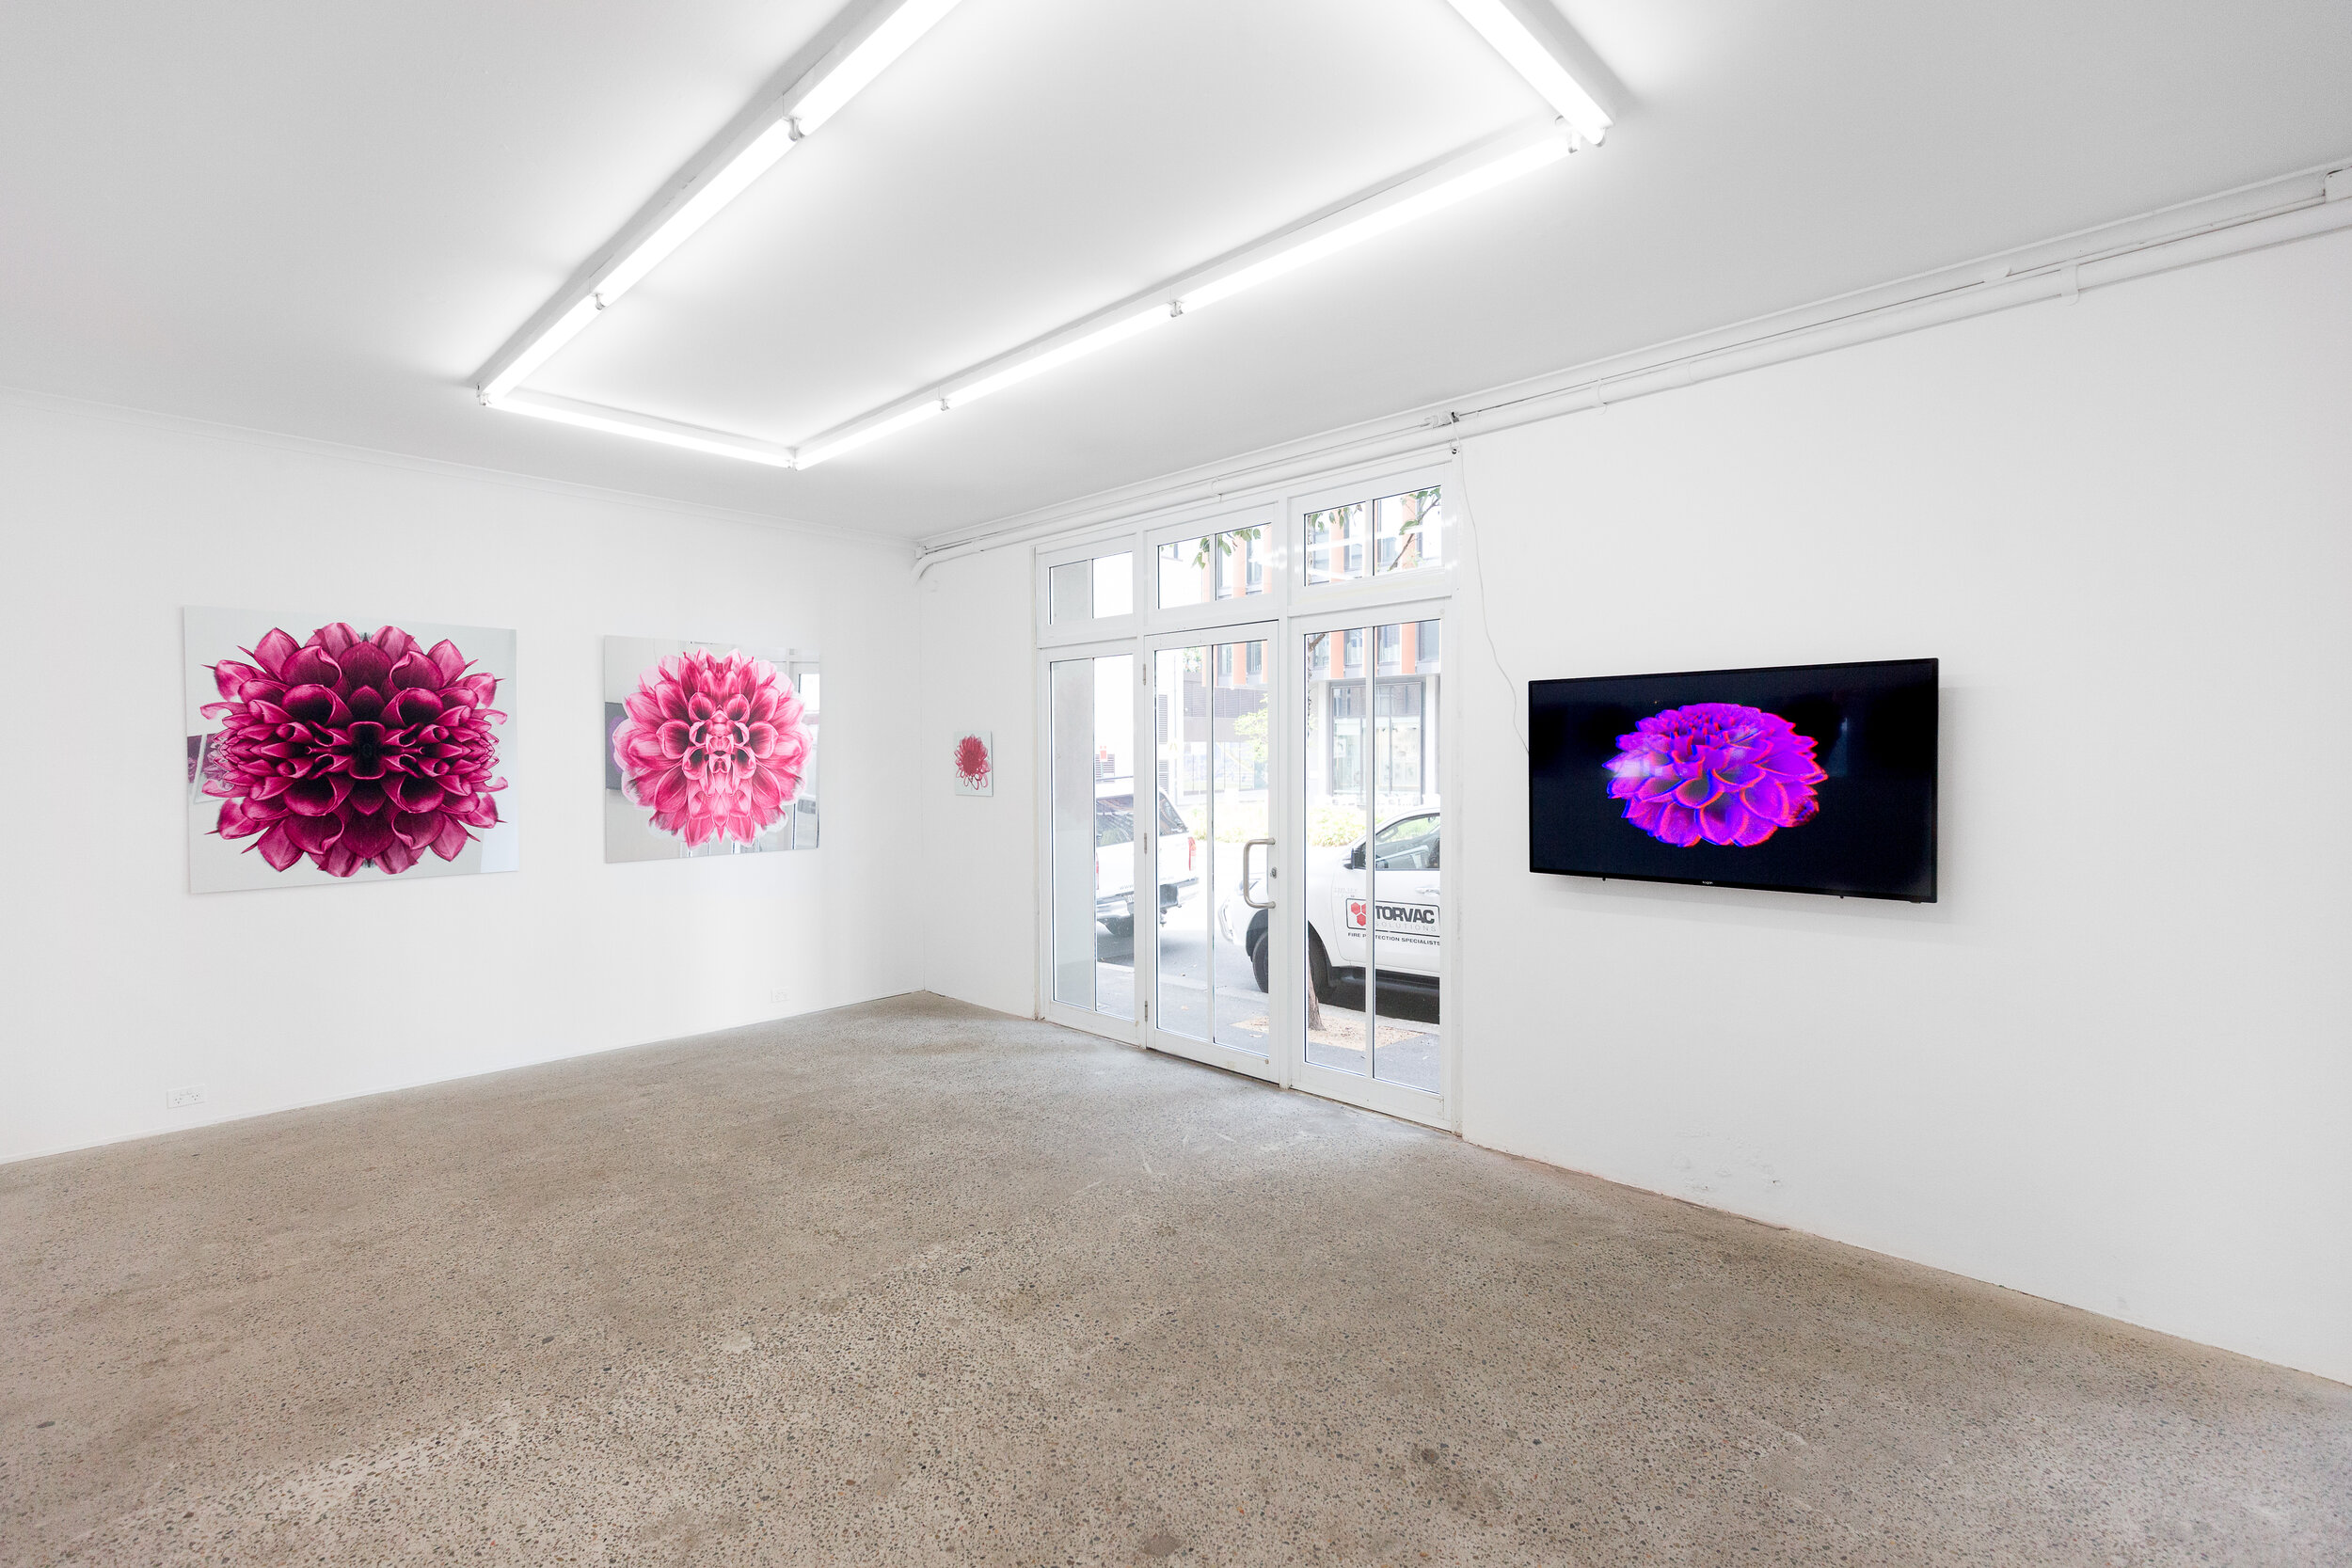  Erica Seccombe, BIG PINK 2019, installation view at Galerie pompom. Photo: Docqment 